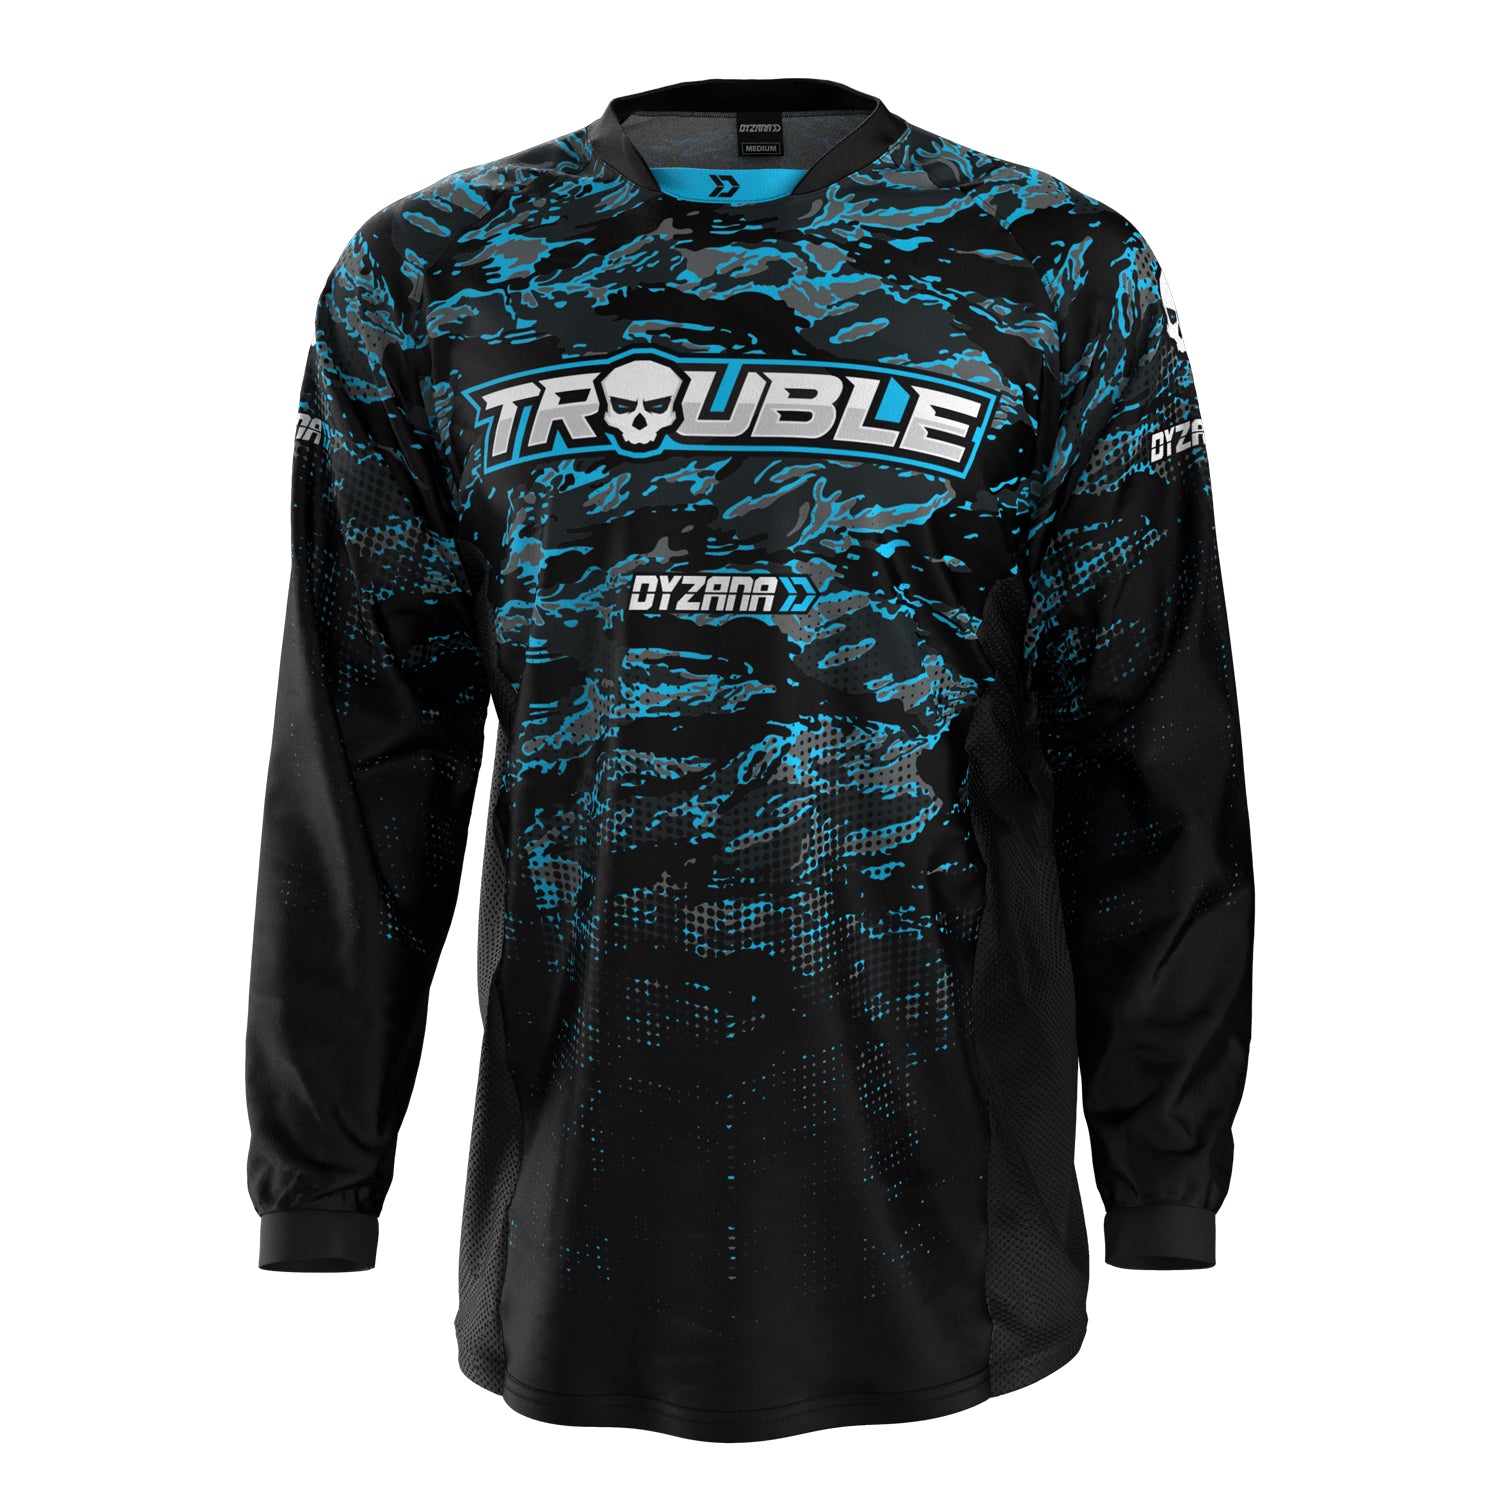 Trouble - Grind Core Jersey